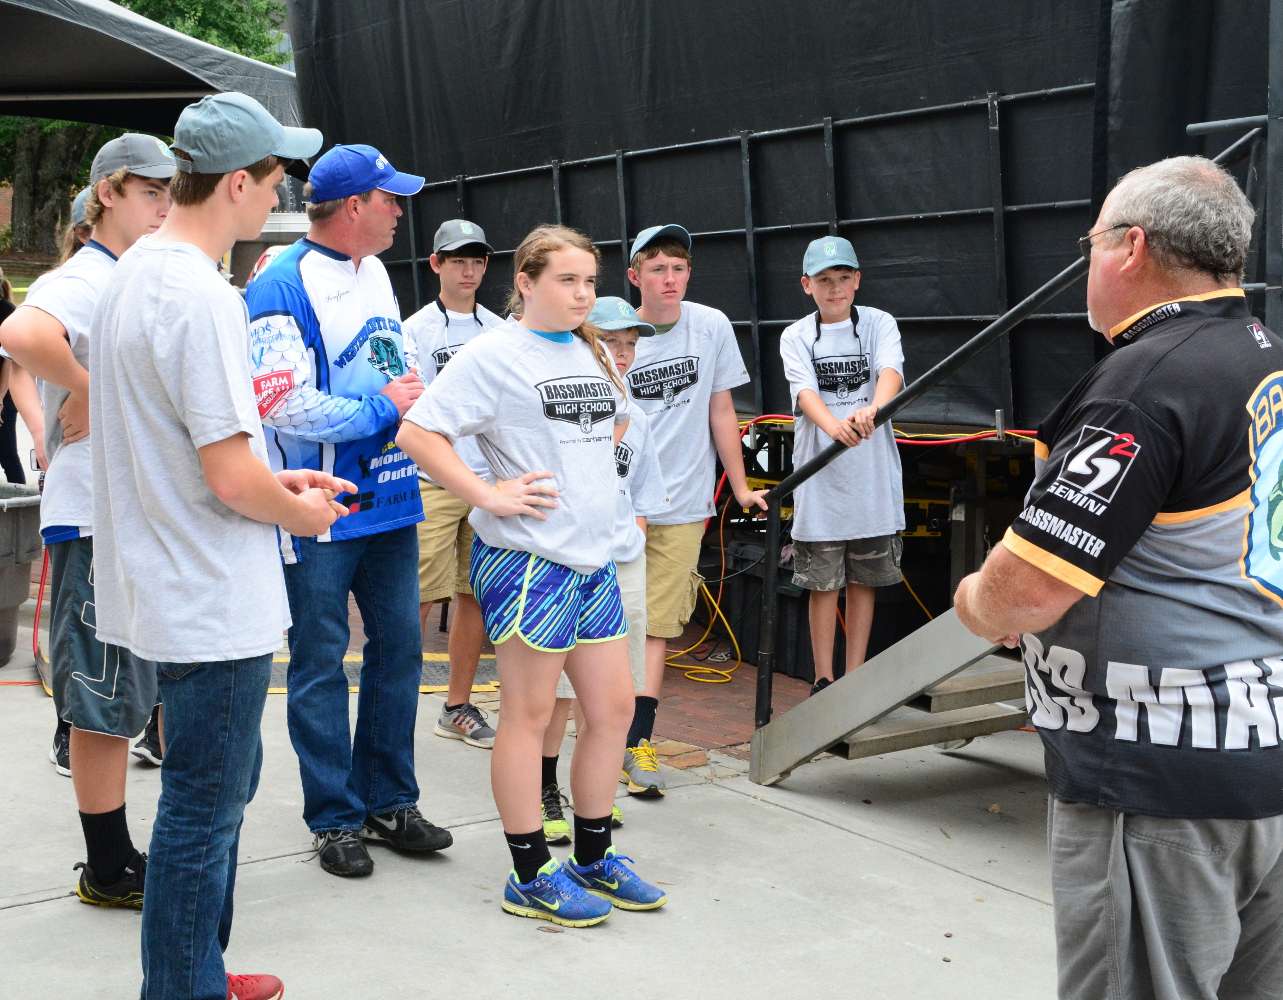 Anglers in the Hayesville High School fishing club get briefed on their volunteer duties prior to weigh-in.